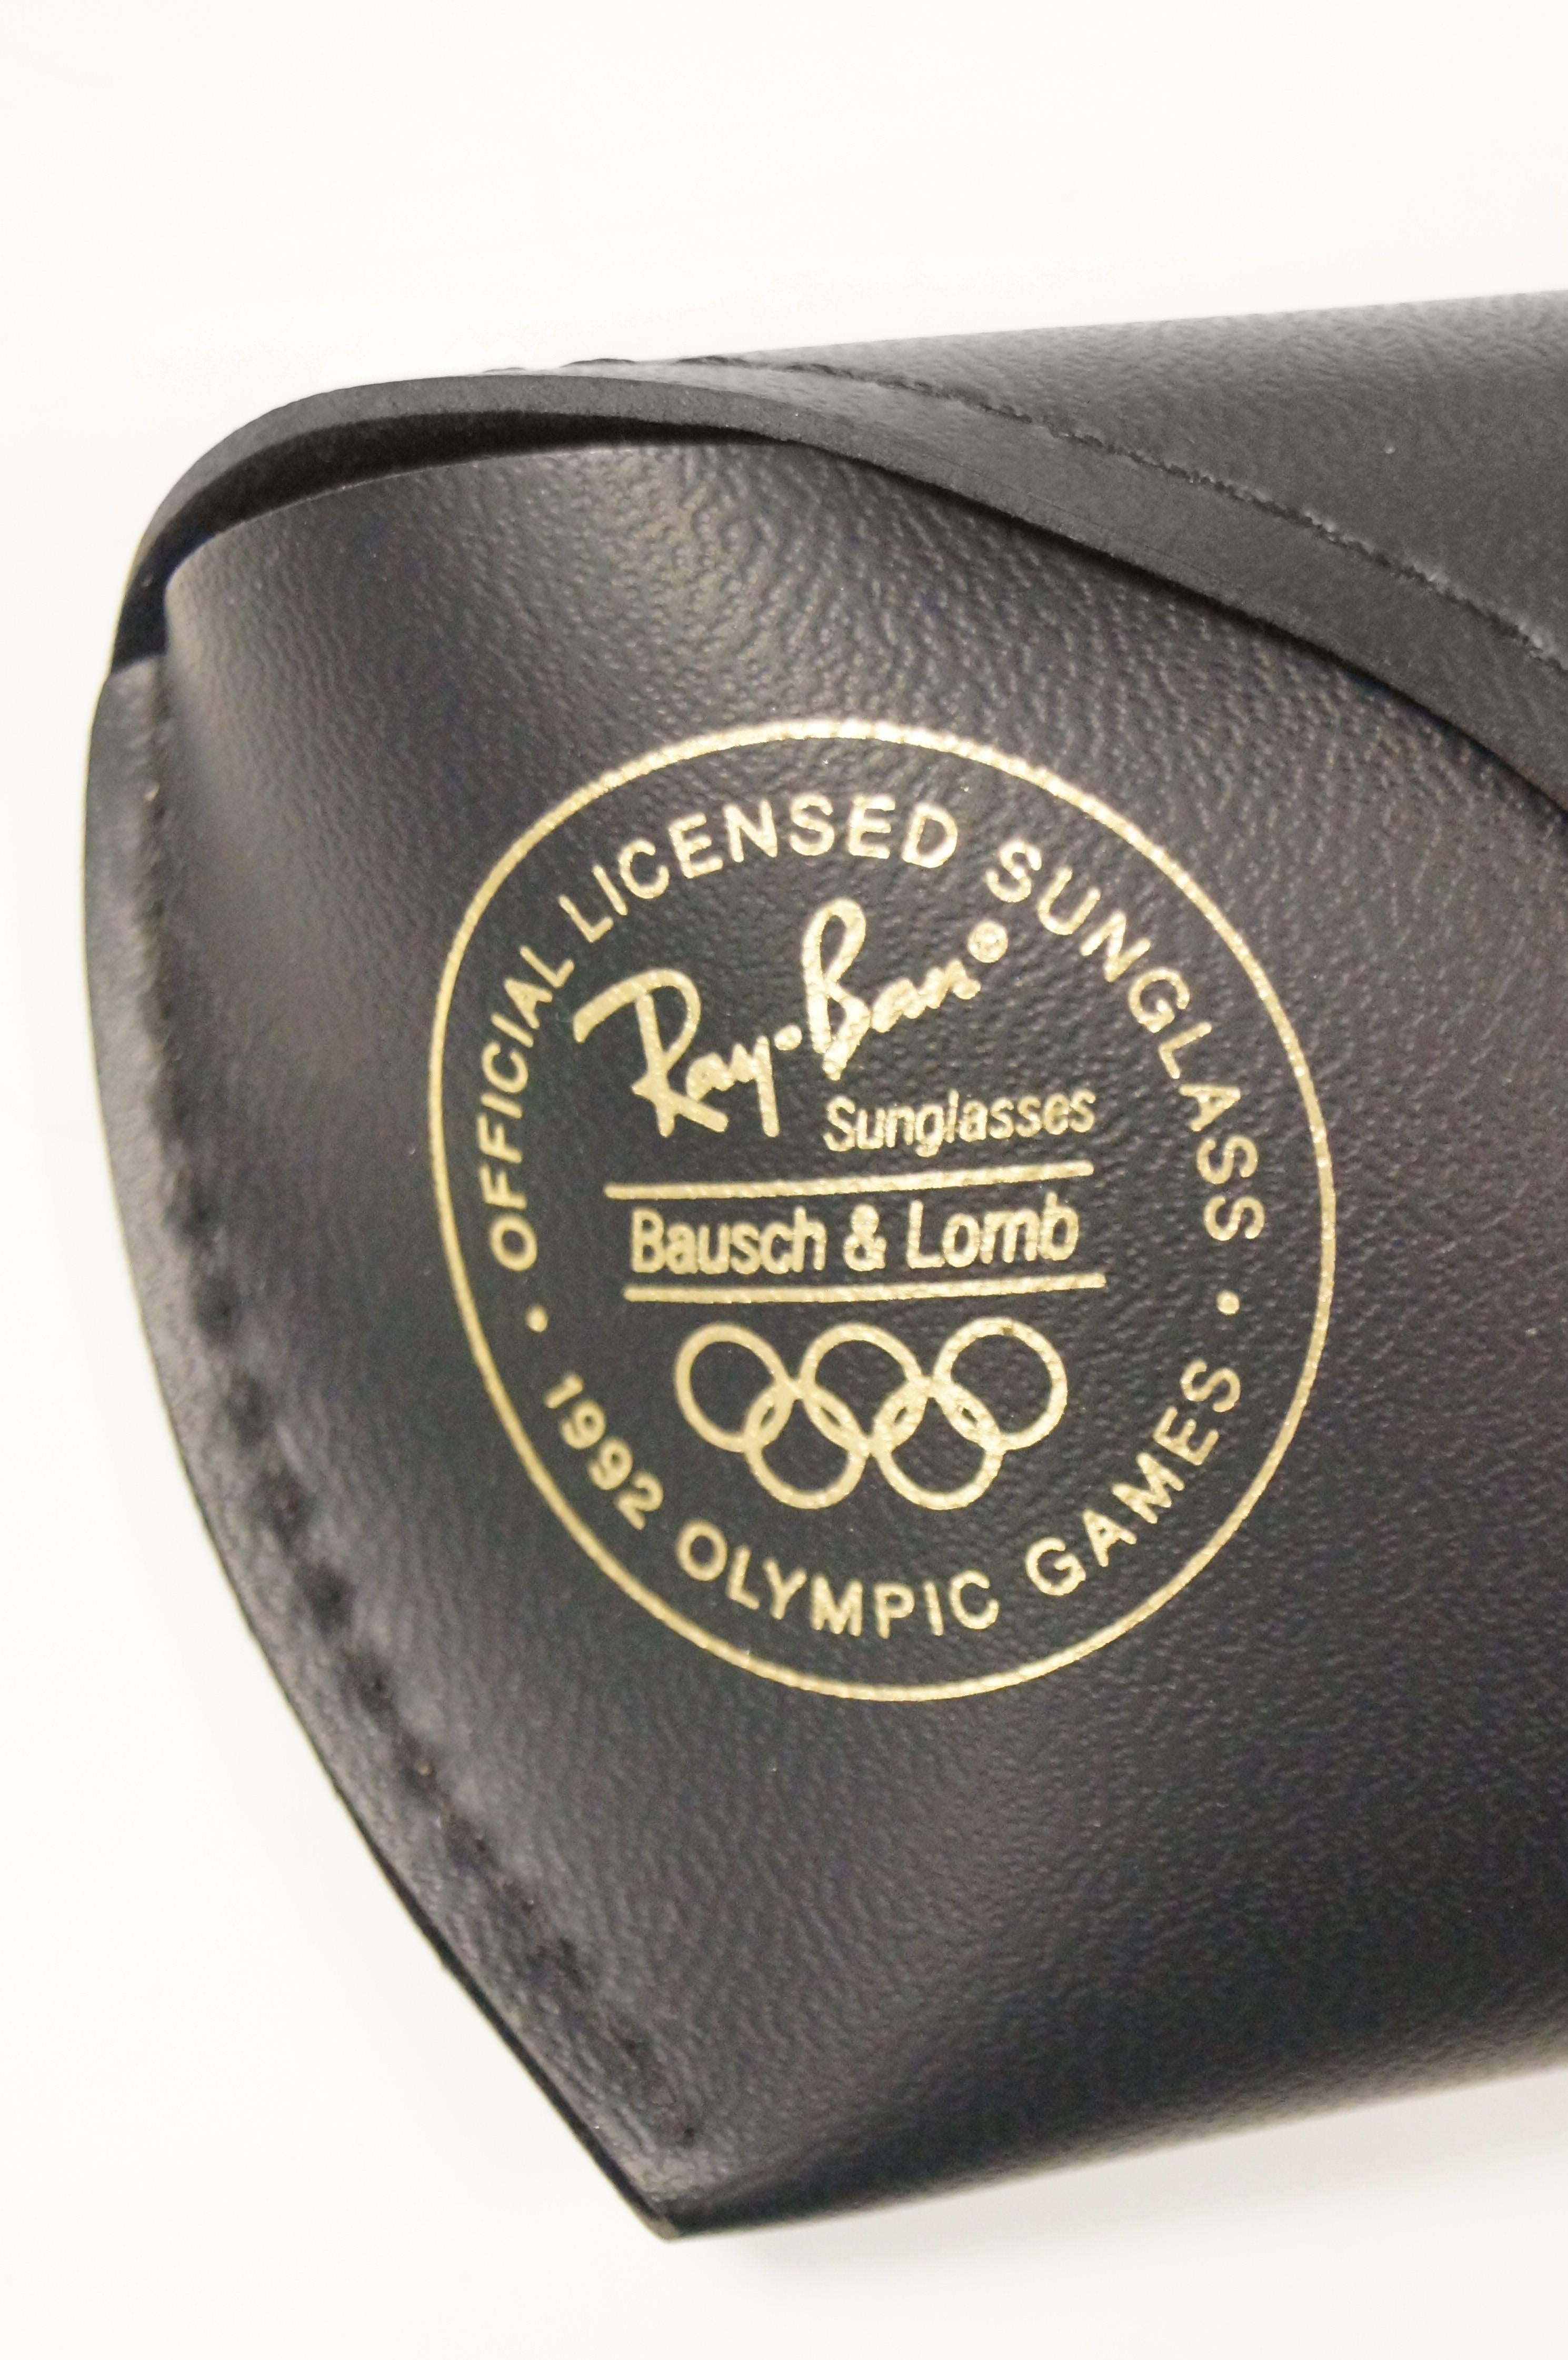  Bausch & Lomb Ray-Ban Olympic Edition Sunglasses, 1992 1